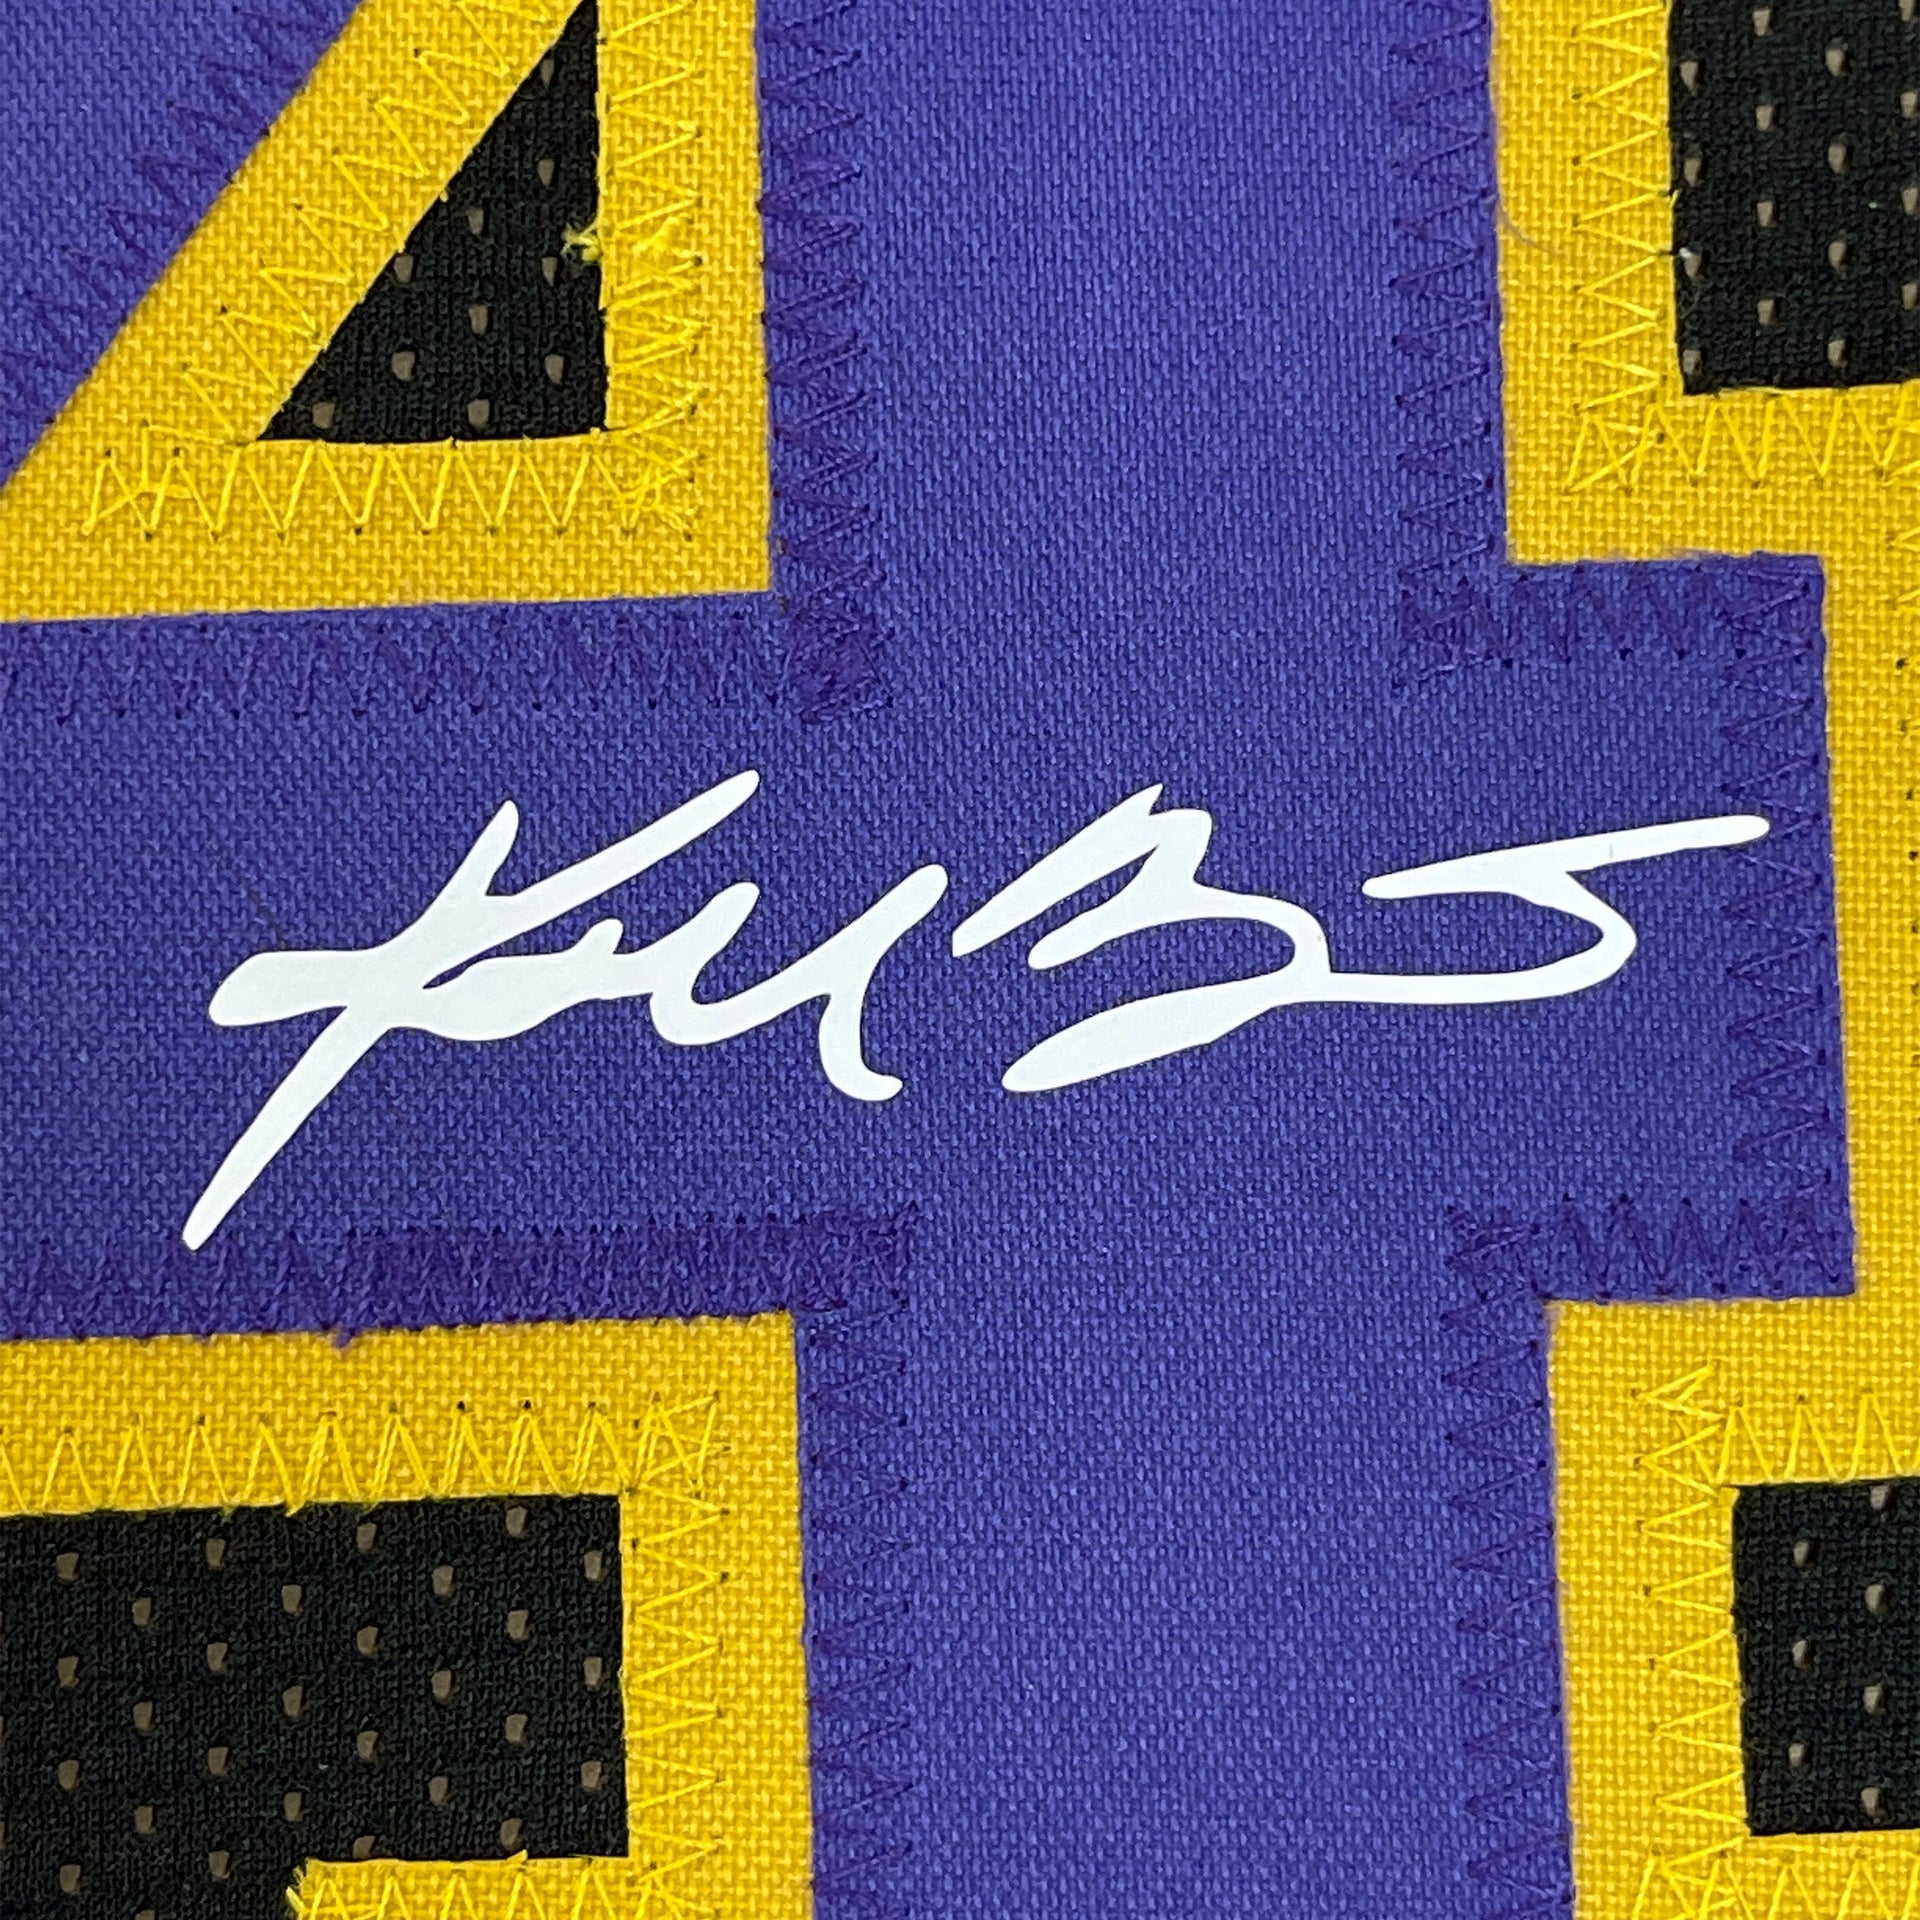 Framed Autographed/Signed Kobe Bryant 33x42 Los Angeles LA Purple  Basketball Jersey PSA/DNA COA at 's Sports Collectibles Store